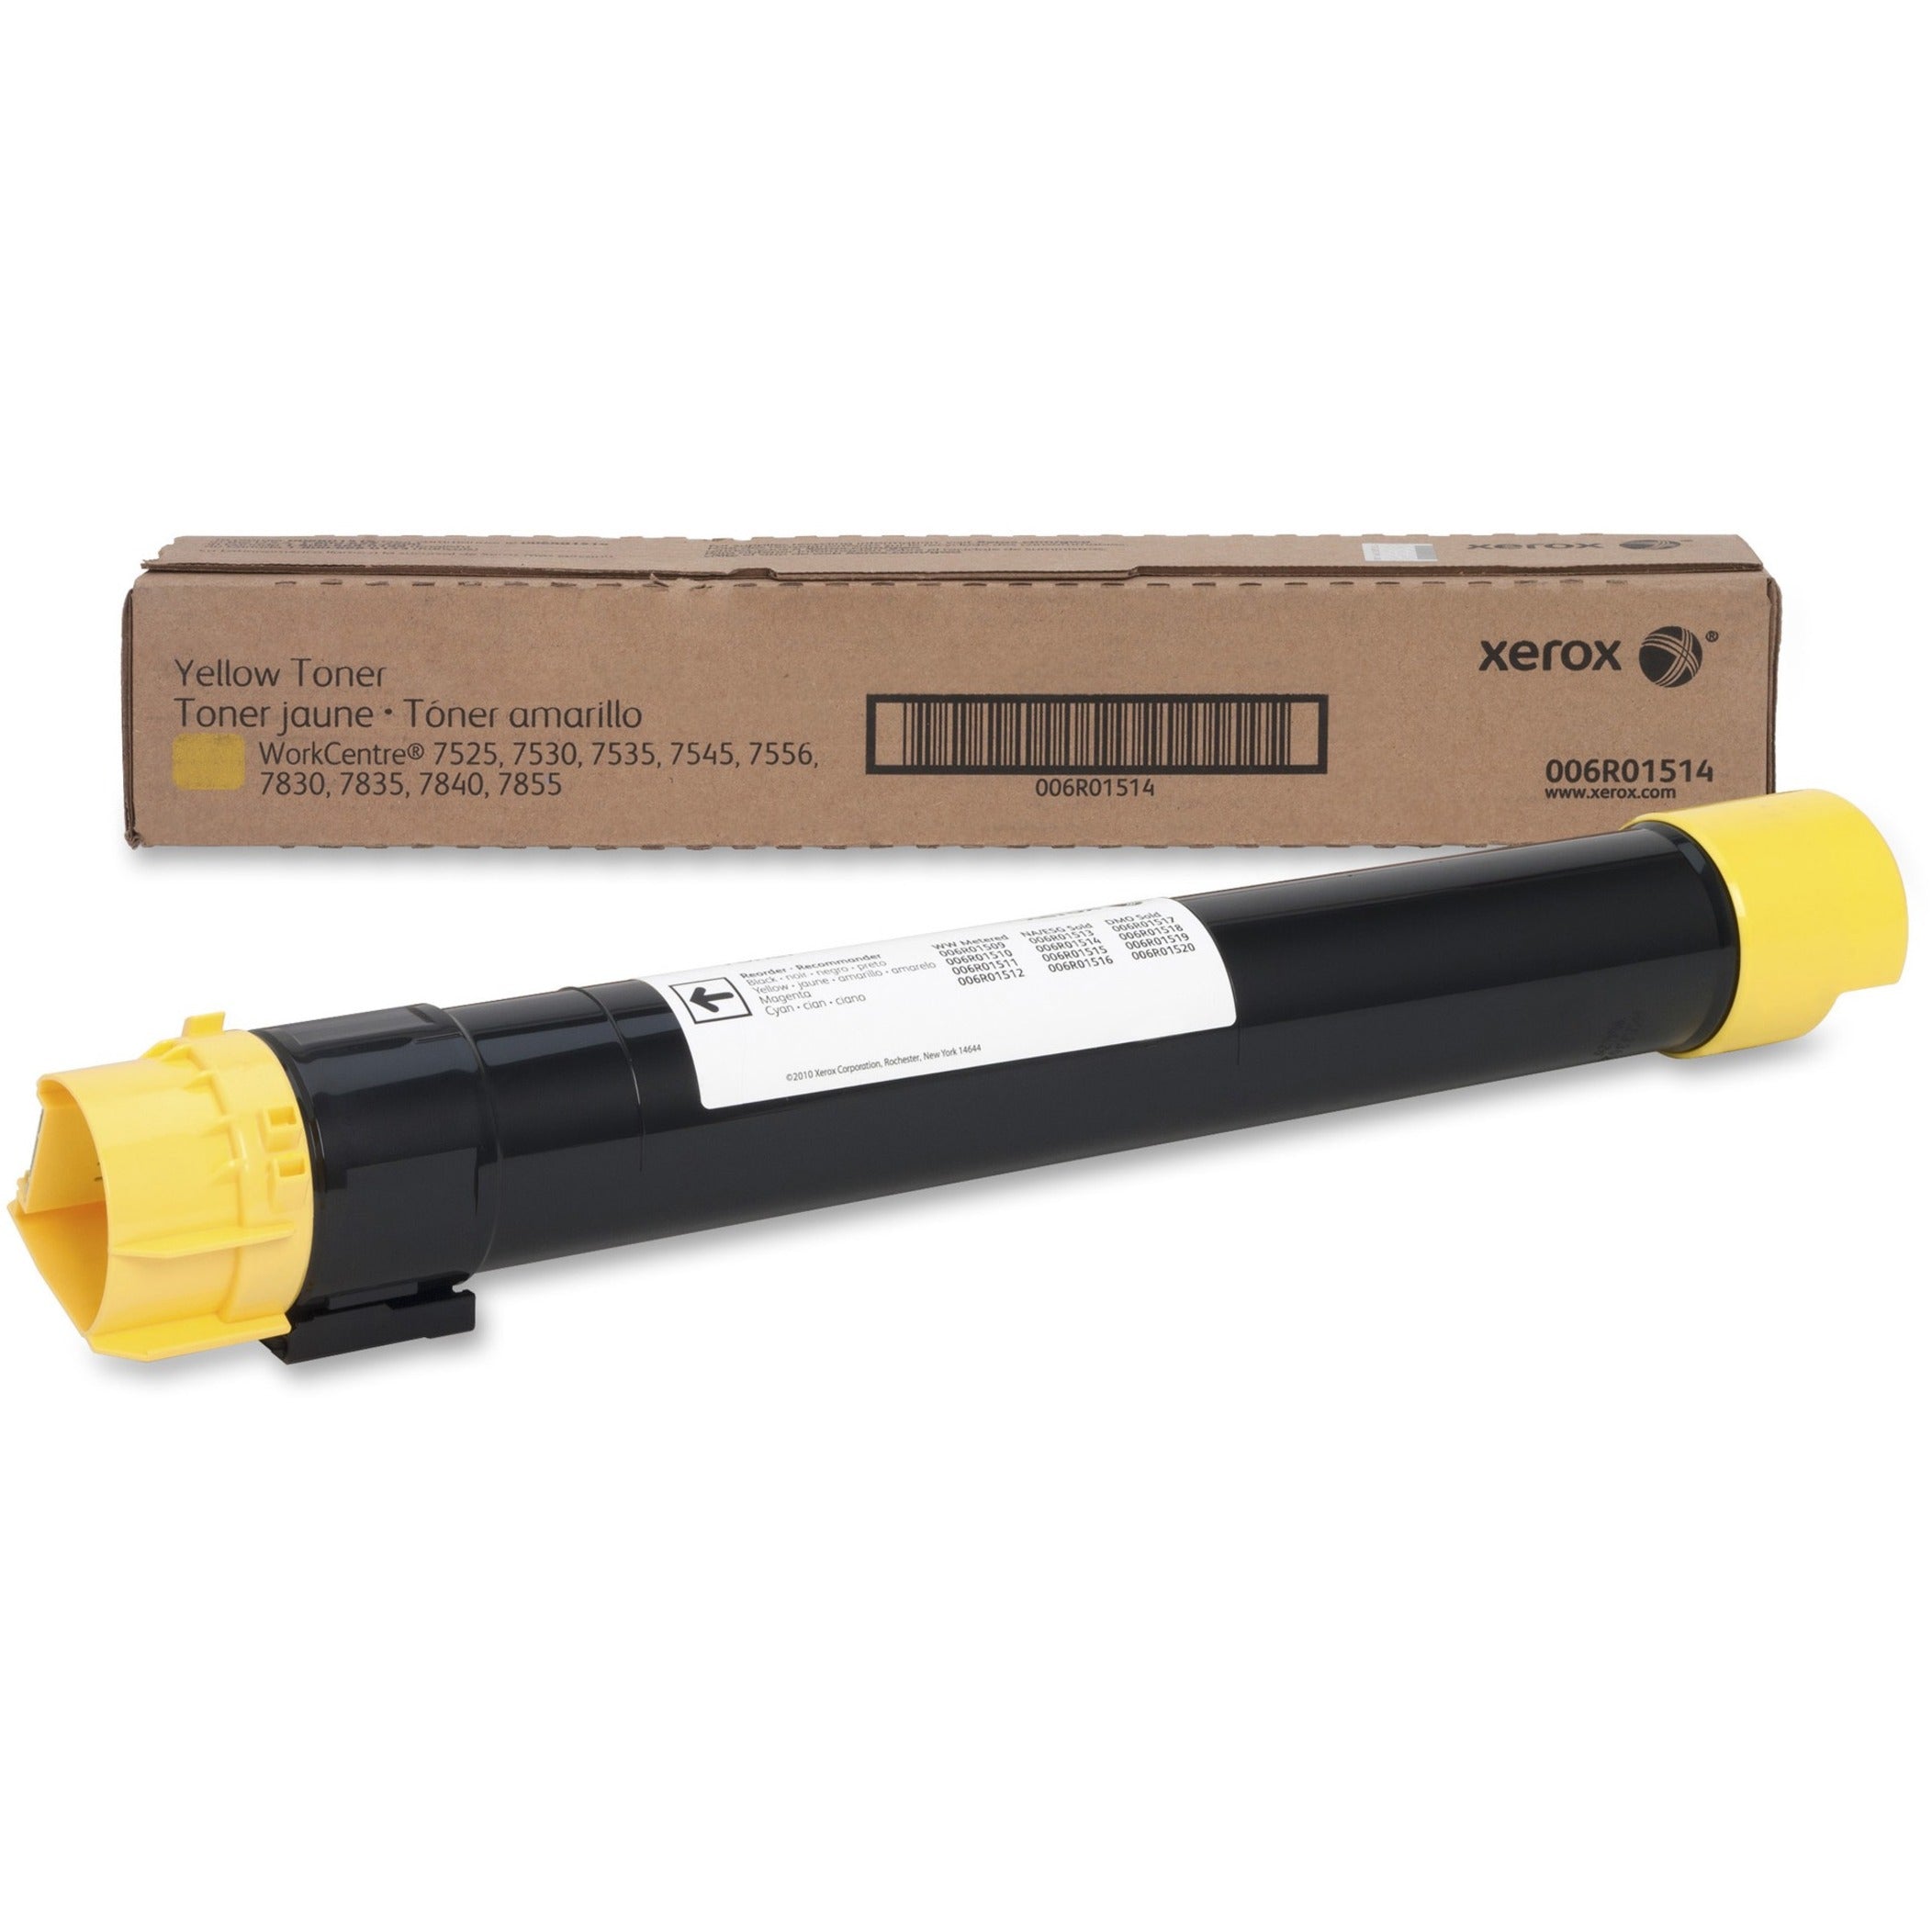 Xerox 006R01514 WorkCentre 7855 Toner Cartridge, Yellow, 15,000 Pages